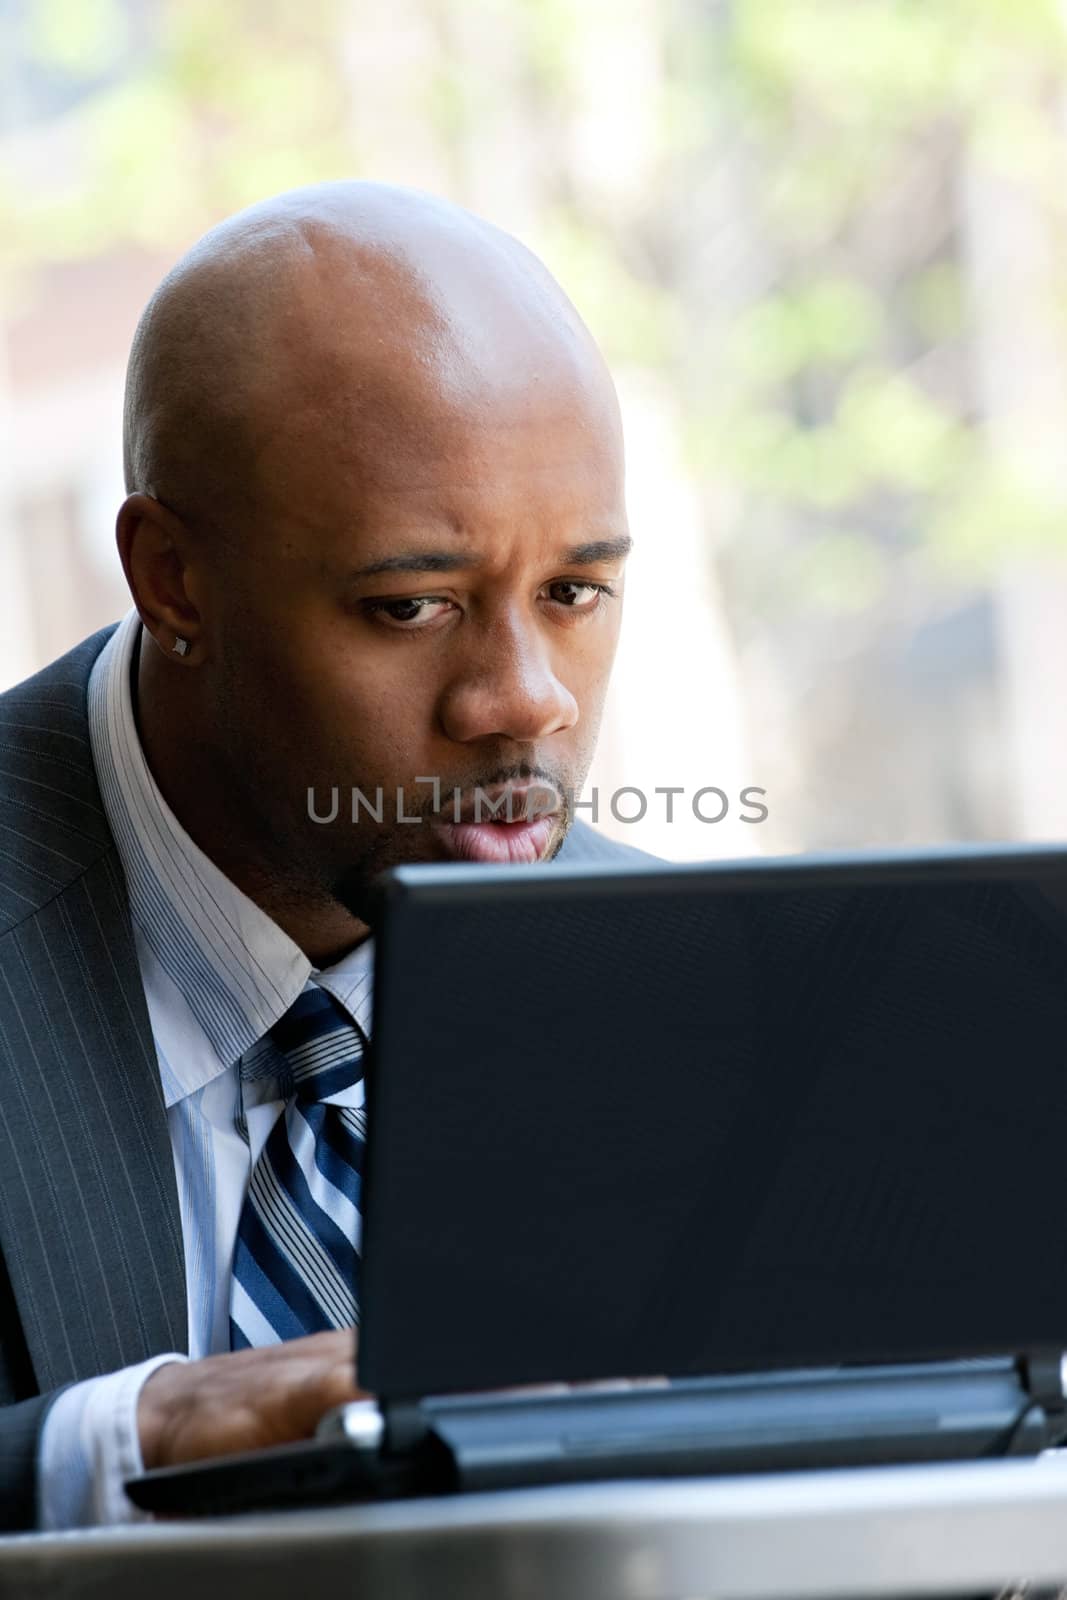 A business man in his early 30s working on his laptop or netbook computer outdoors with a surprised or shocked expression on his face.